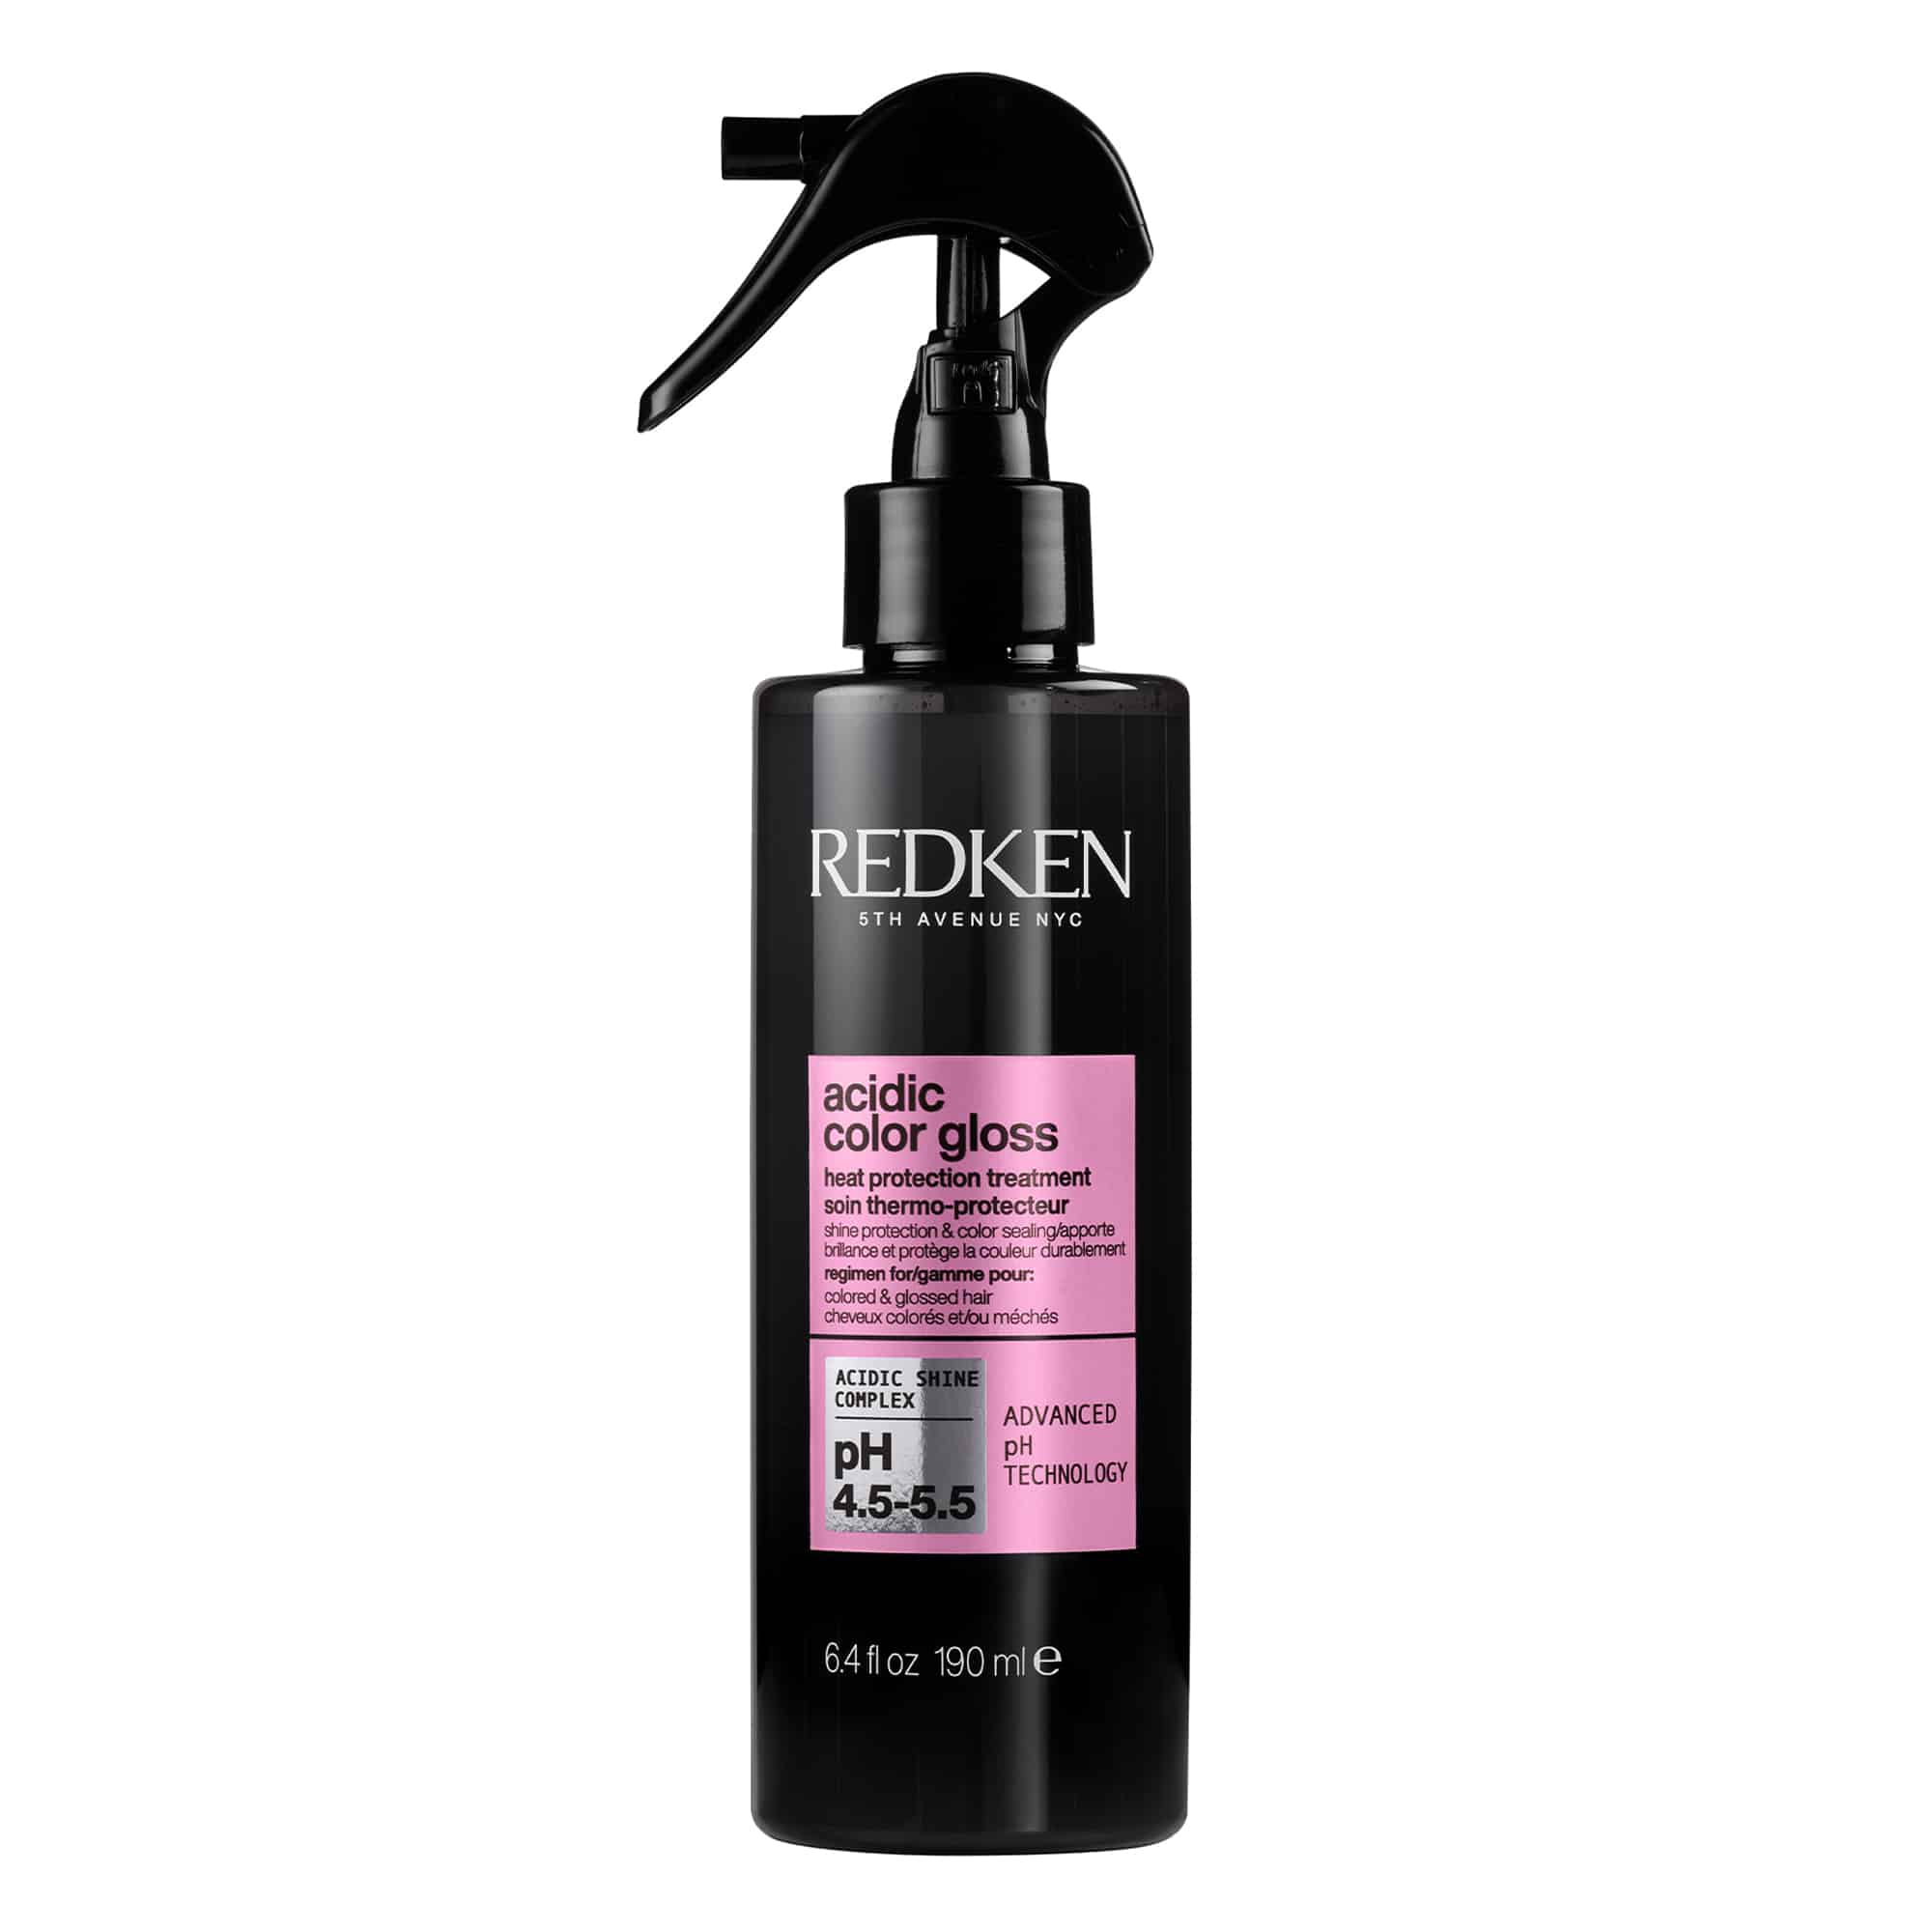 Redken - Acidic Color Gloss Heat Protectant Leave-In Treatment 190ml